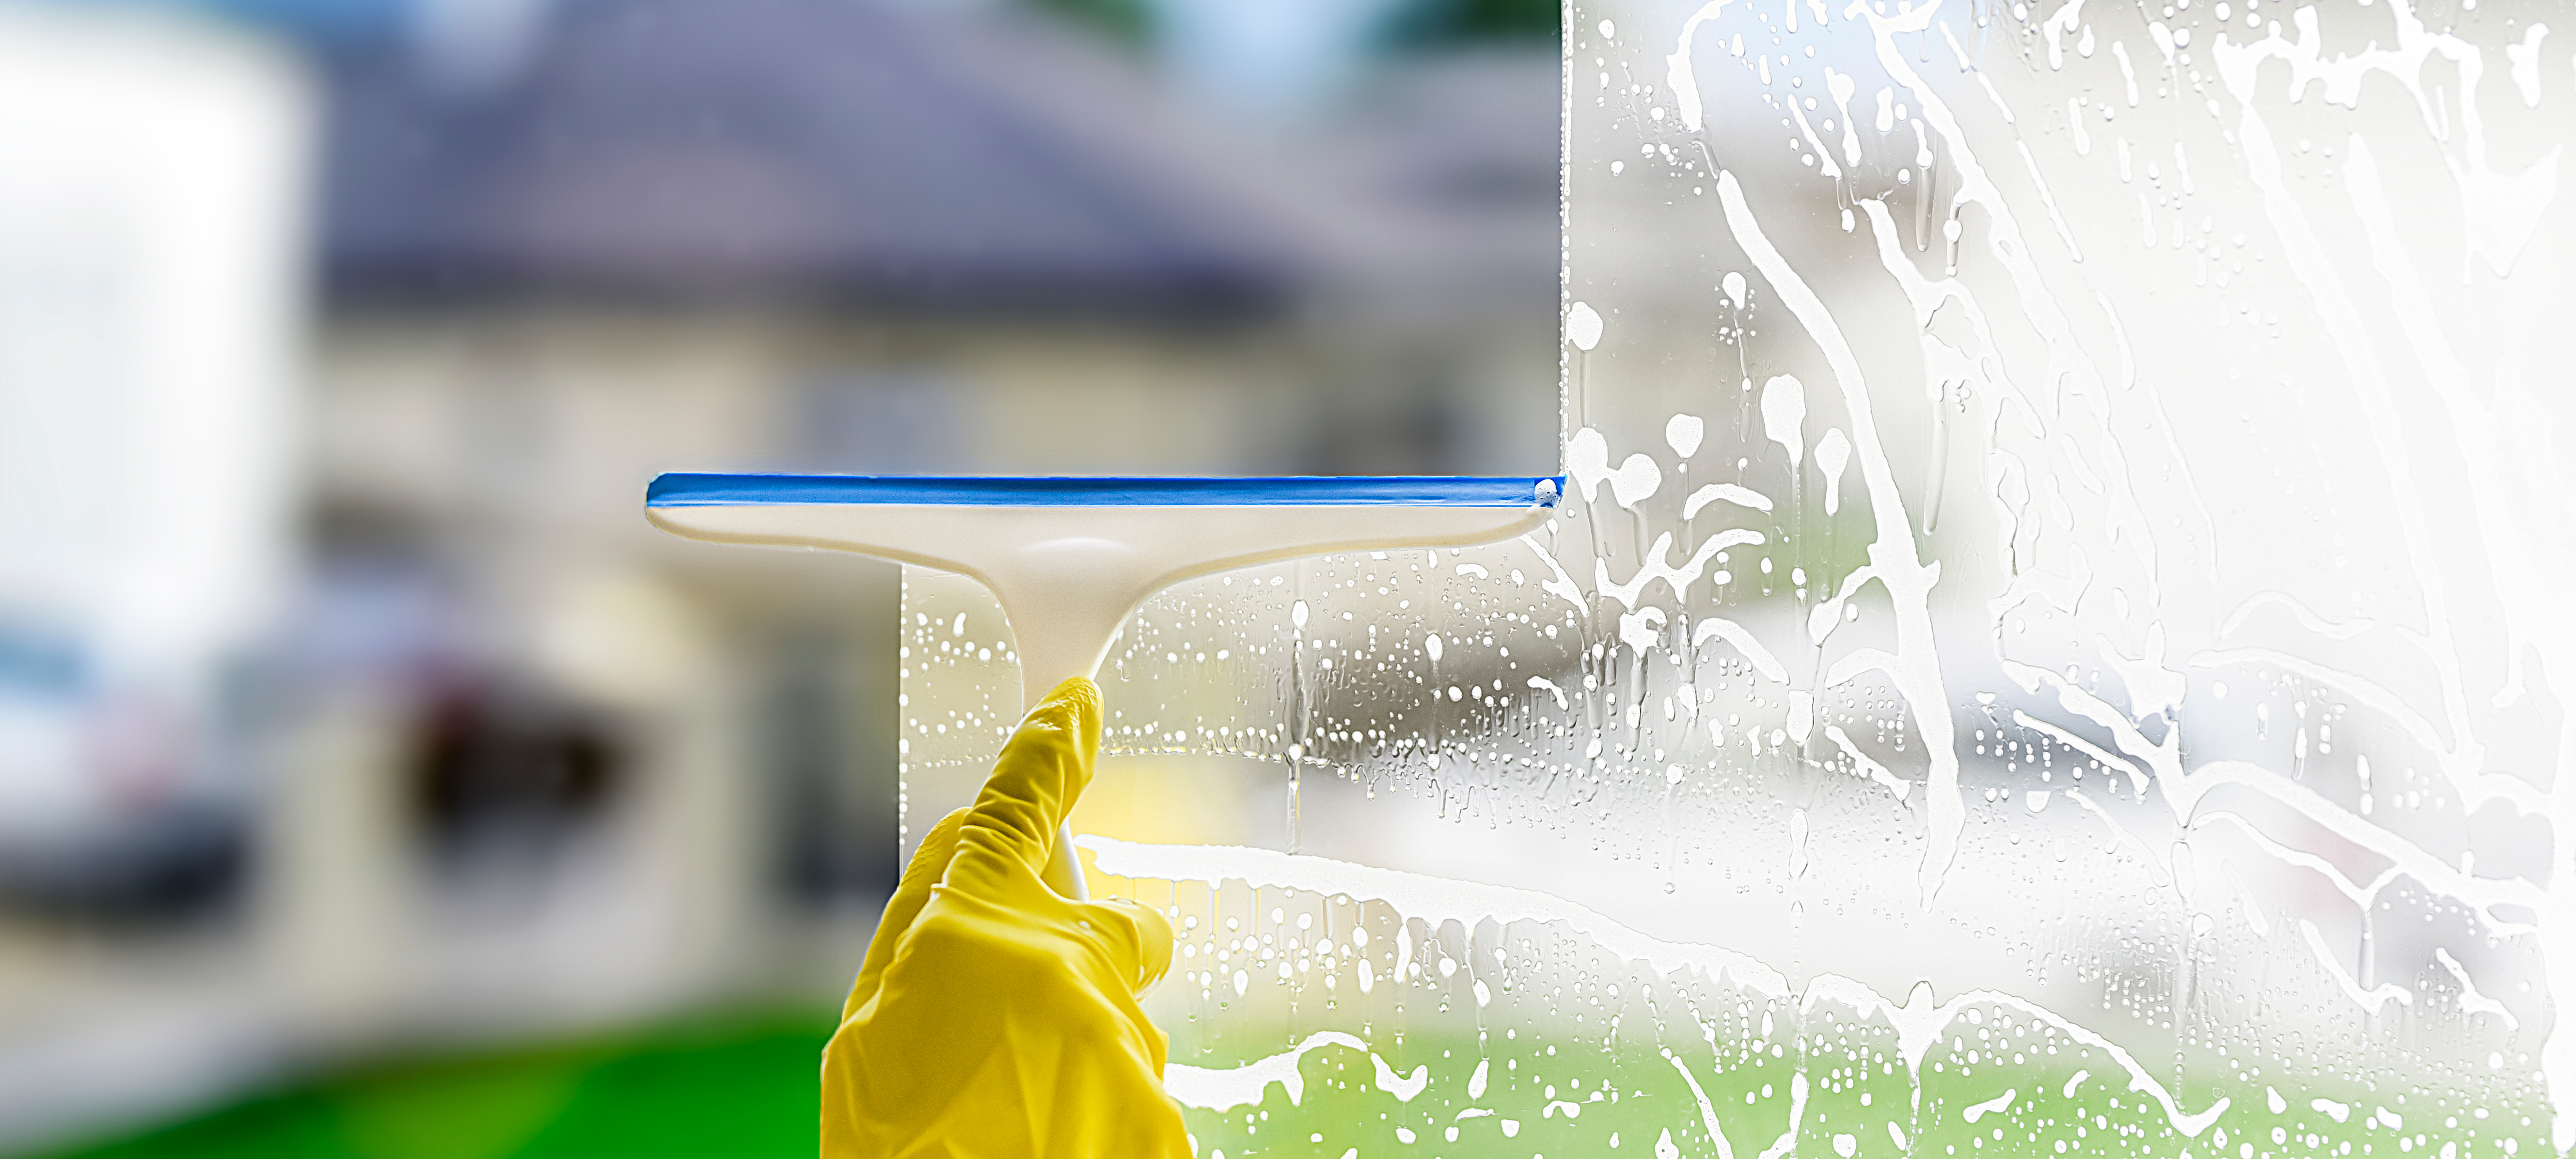 a hand wearing a yellow glove cleaning windows with a wiper as part of the spring cleaning checklist